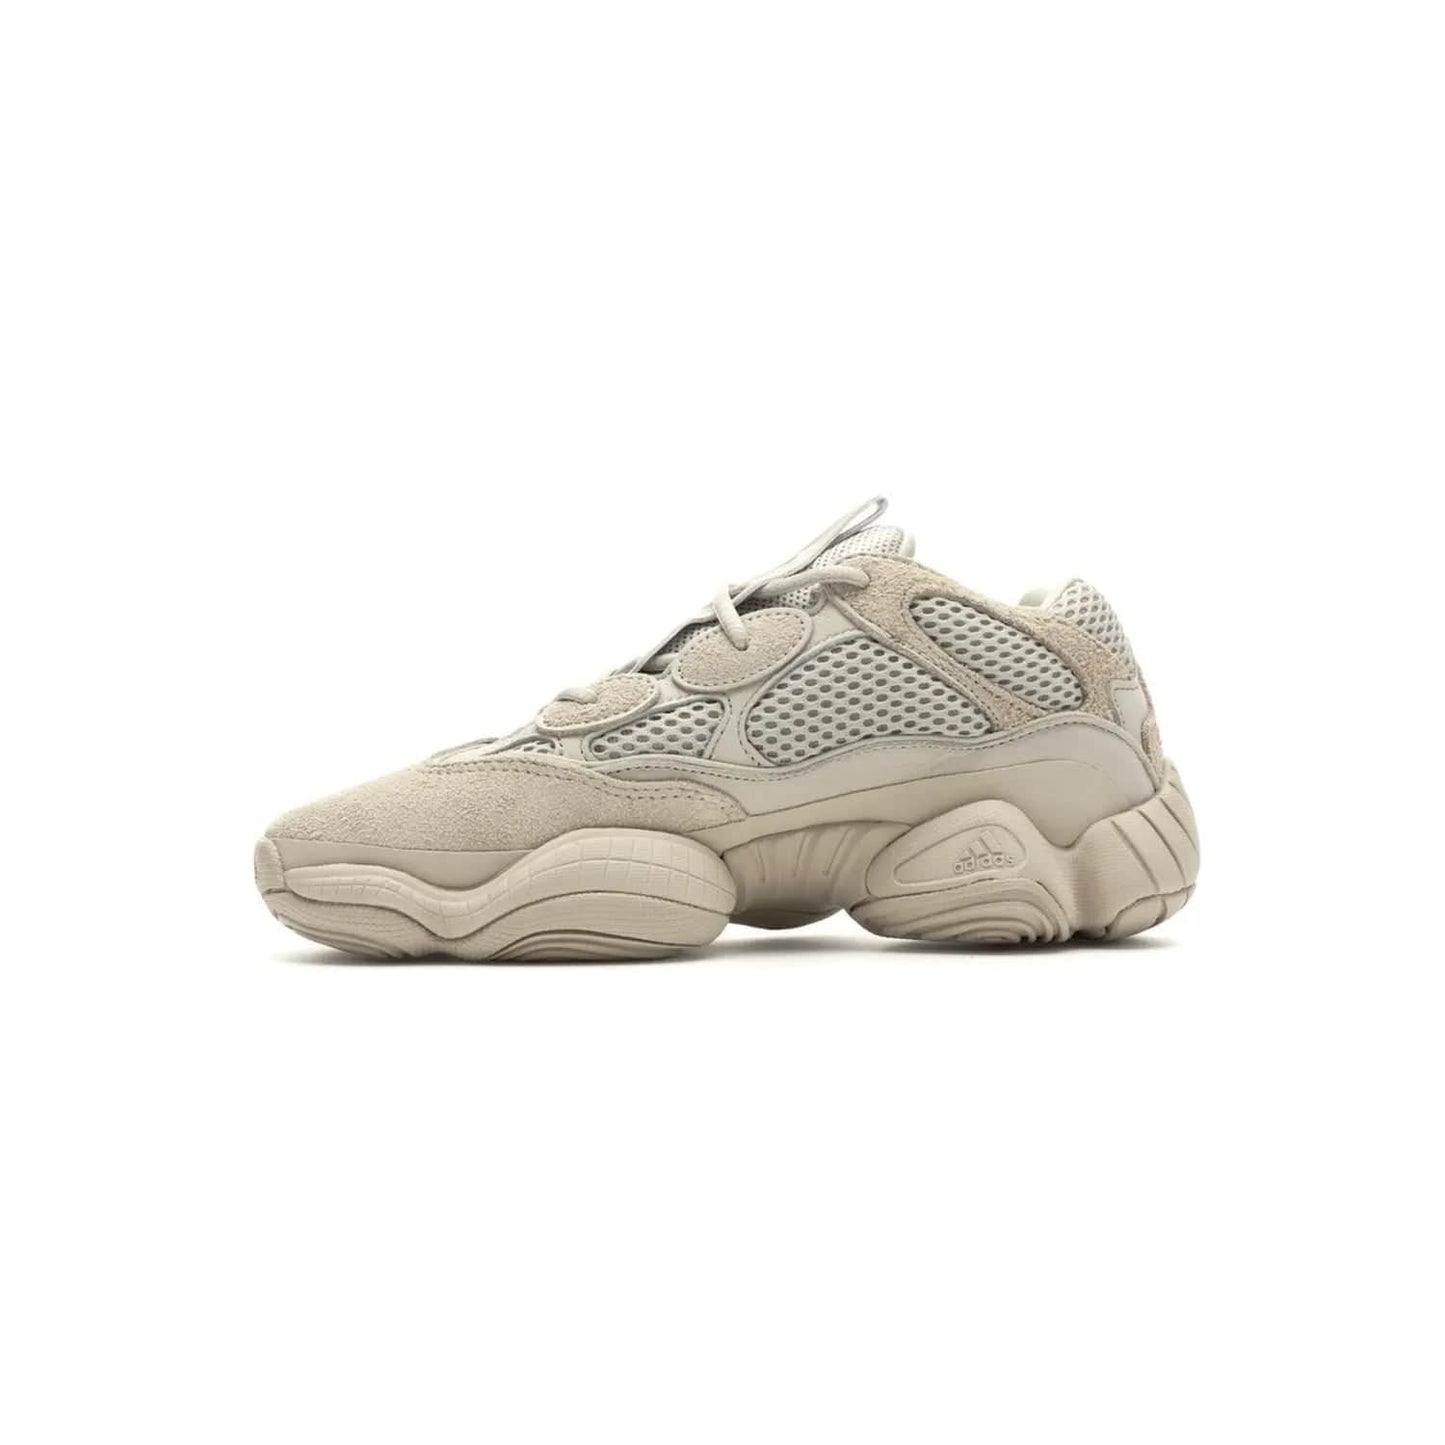 adidas Yeezy 500 Blush - Image 18 - Only at www.BallersClubKickz.com - Step up your sneaker game with the Adidas Yeezy 500 Blush. Monochromatic pale pink palette, hiking-inspired suede/mesh construction, plus adiPRENE sole for comfort and performance. Get the Adidas Yeezy 500 and experience true style and comfort.